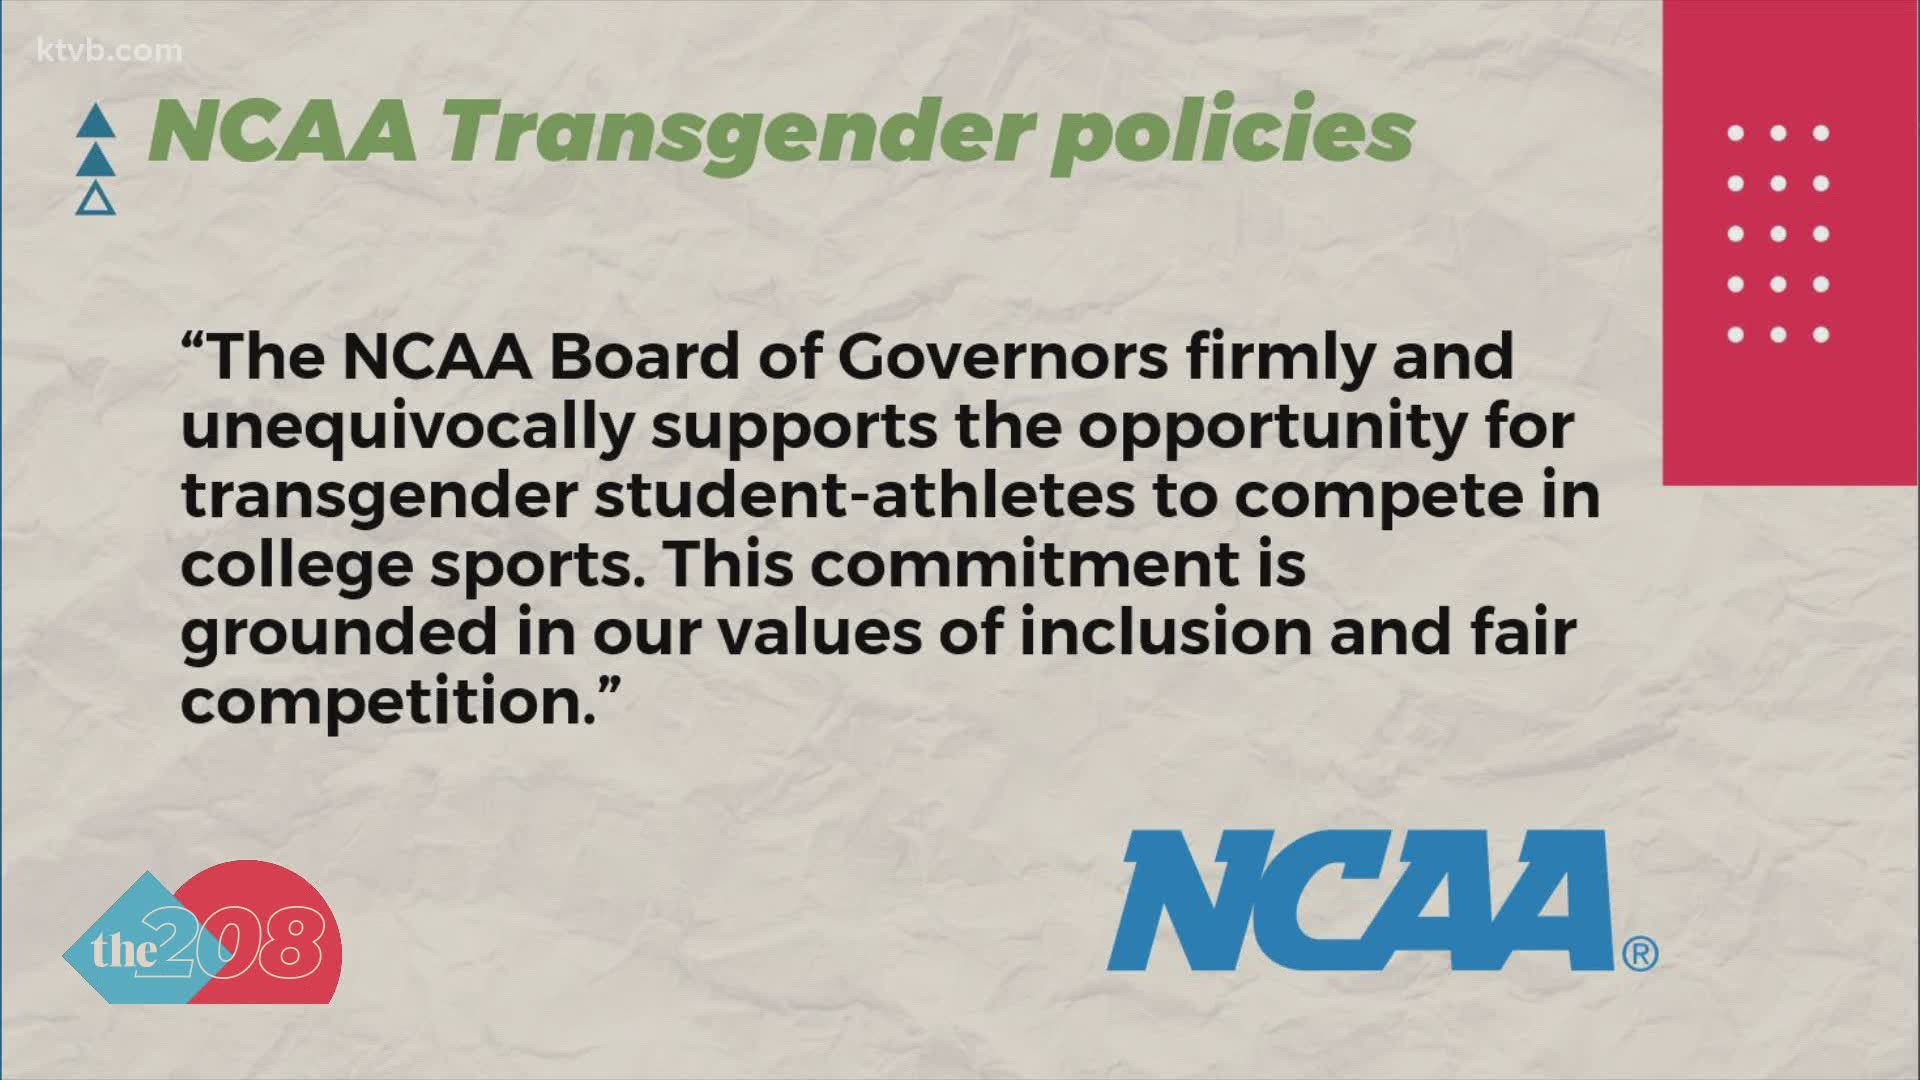 "NCAA policy directs that only locations where hosts can commit to providing an environment that is safe, healthy and free of discrimination should be selected."